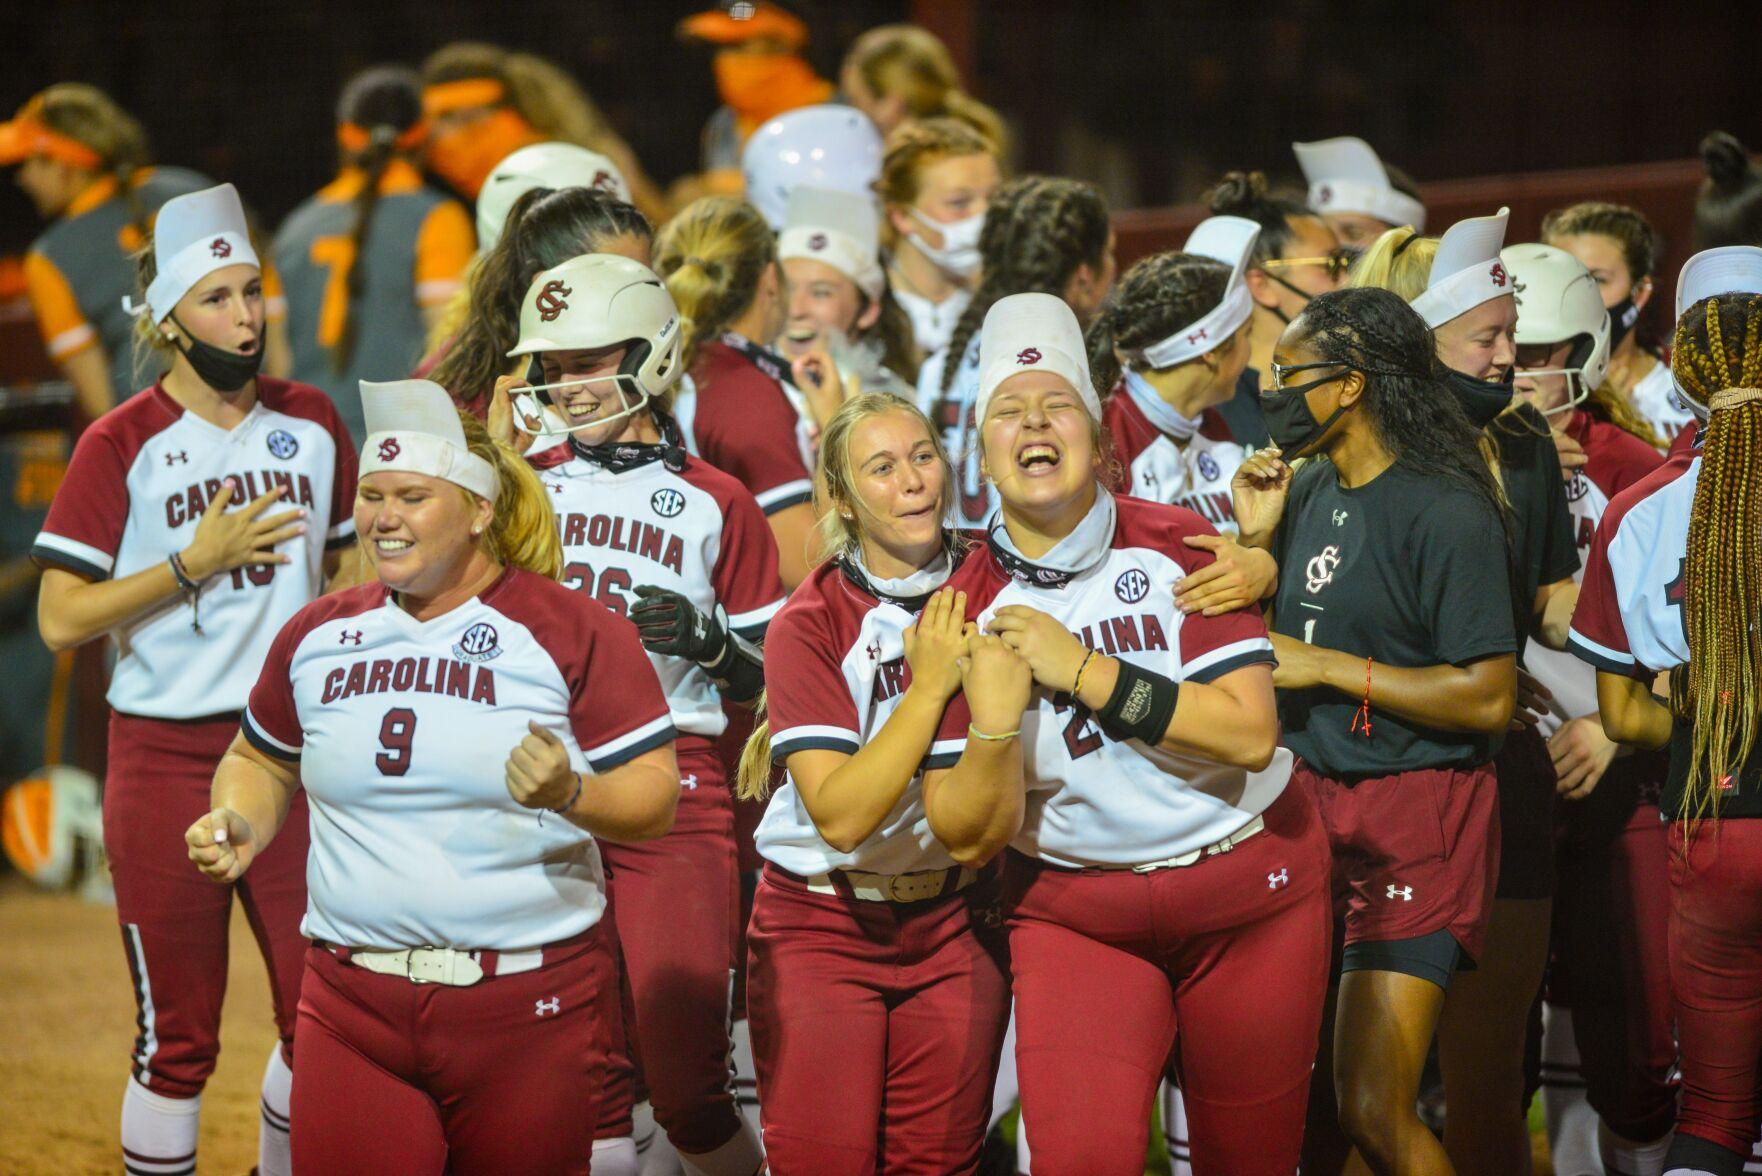 Gamecocks' softball coach opens up about sour season, looking ahead